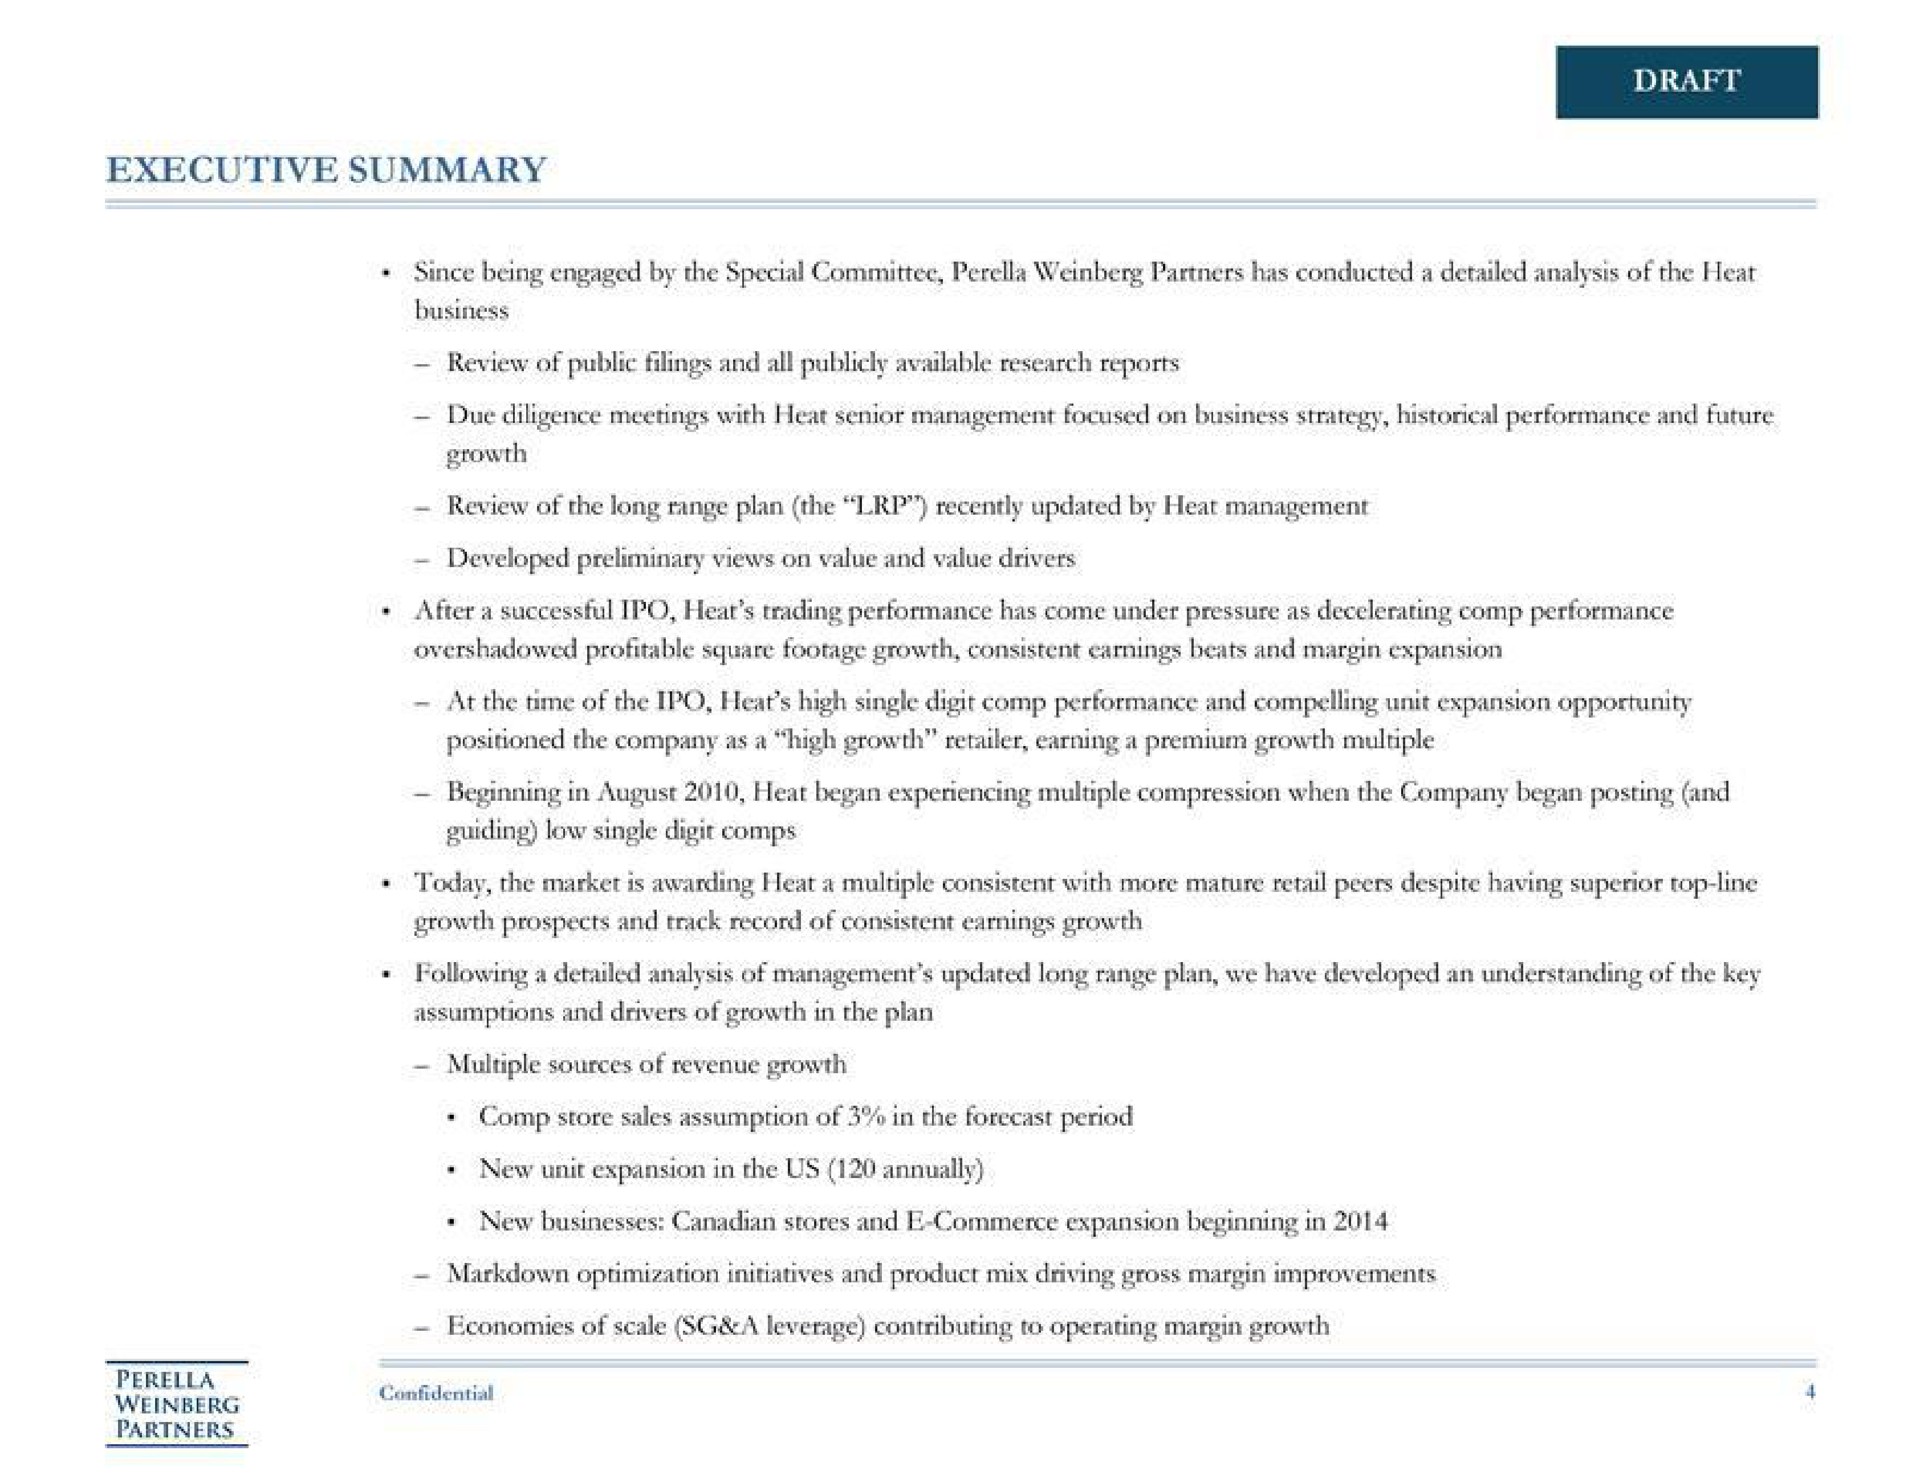 executive summary draft since being engaged by the special committee partners has conducted a detailed analysis of the heat business growth review of the long range plan the recently updated by heat management developed preliminary views on value and value drivers after a successful heat trading performance has come under pressure as decelerating performance overshadowed profitable square footage growth consistent earnings beats and margin expansion of the heat high single digit performance and compelling unit expansion opportunity positioned the company as a high growth retailer earning a premium growth low single digit today the market is awarding heat a multiple consistent with more mature retail peers despite having superior top line prospects and track record of consistent earnings growth and drivers of growth in the plan | Perella Weinberg Partners